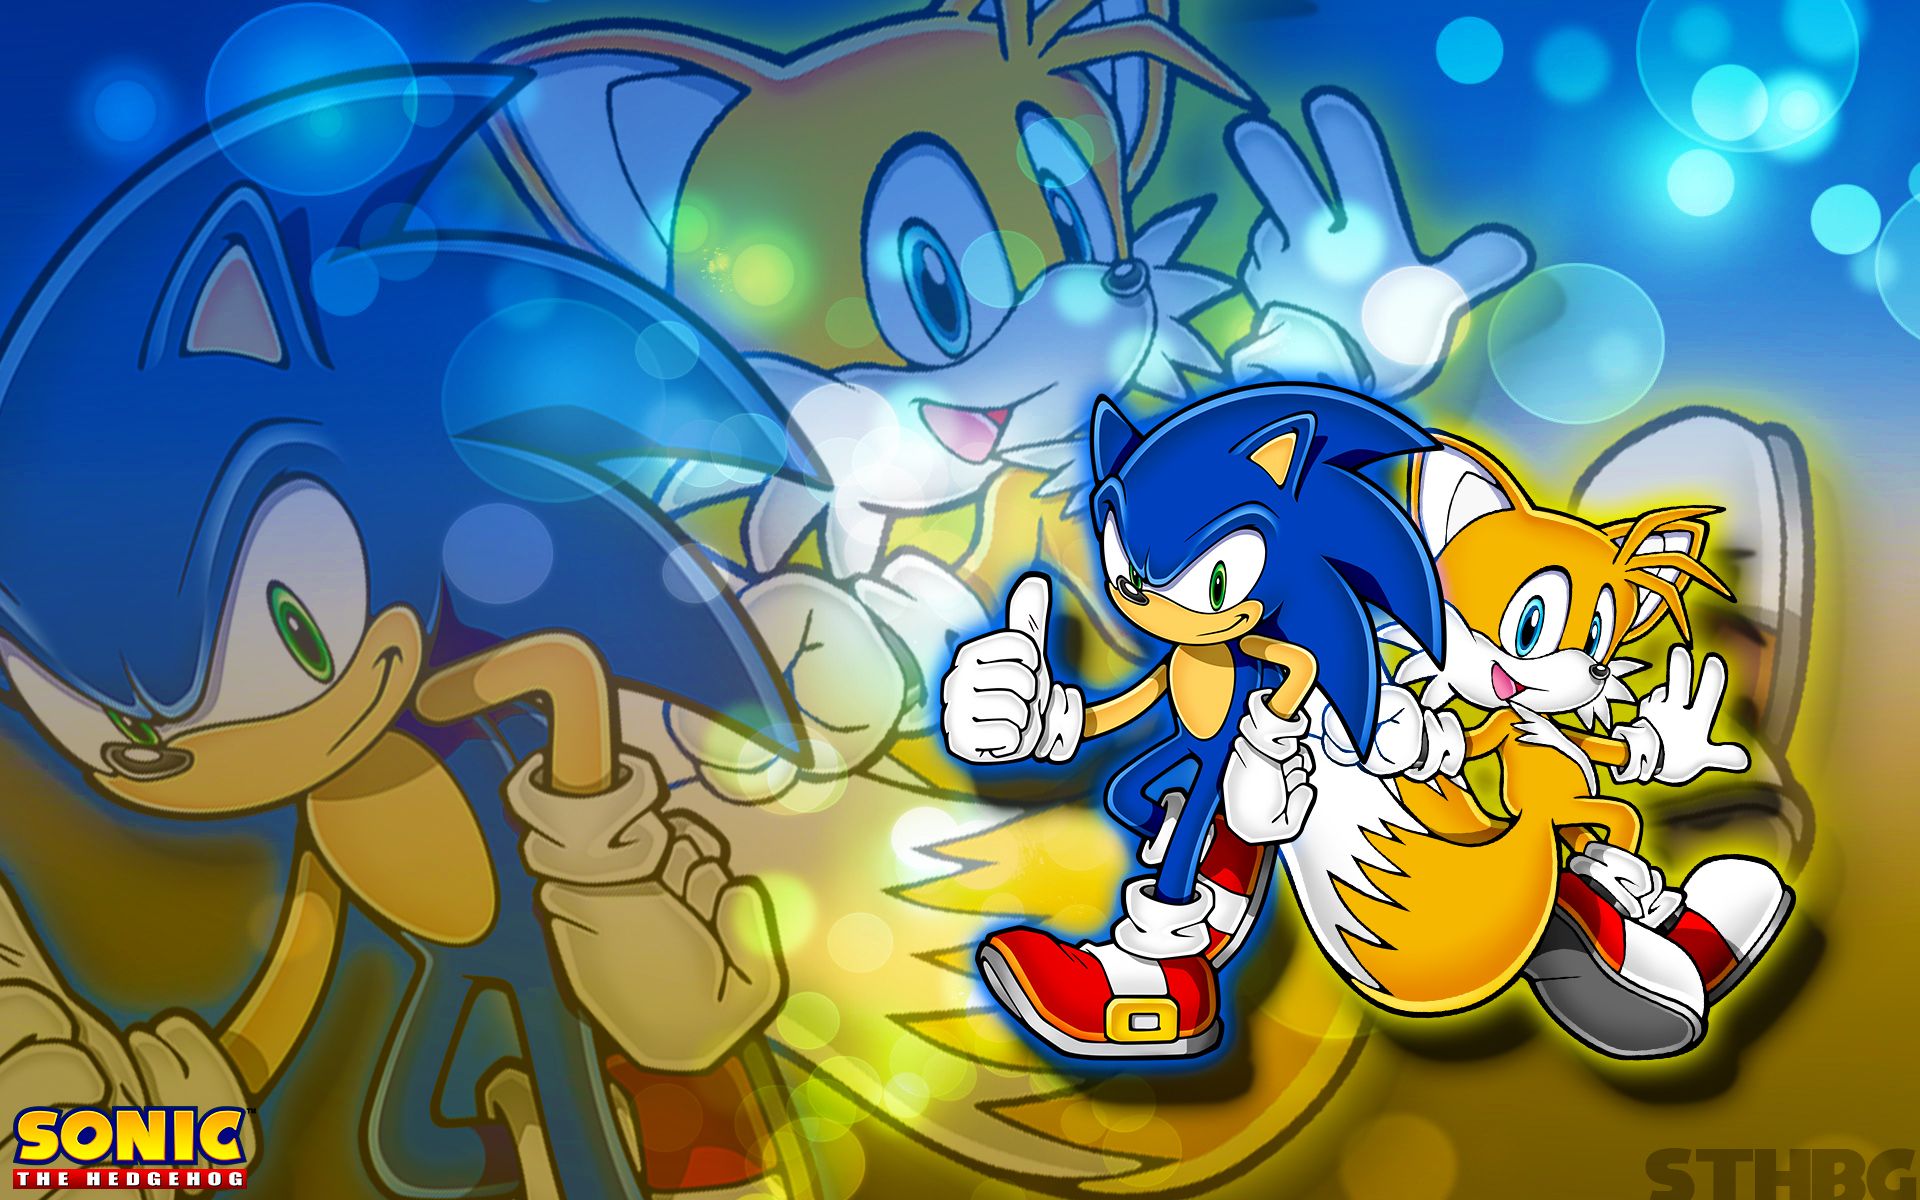 Sonic And Tails Wallpaper by SonicTheHedgehogBG on DeviantArt